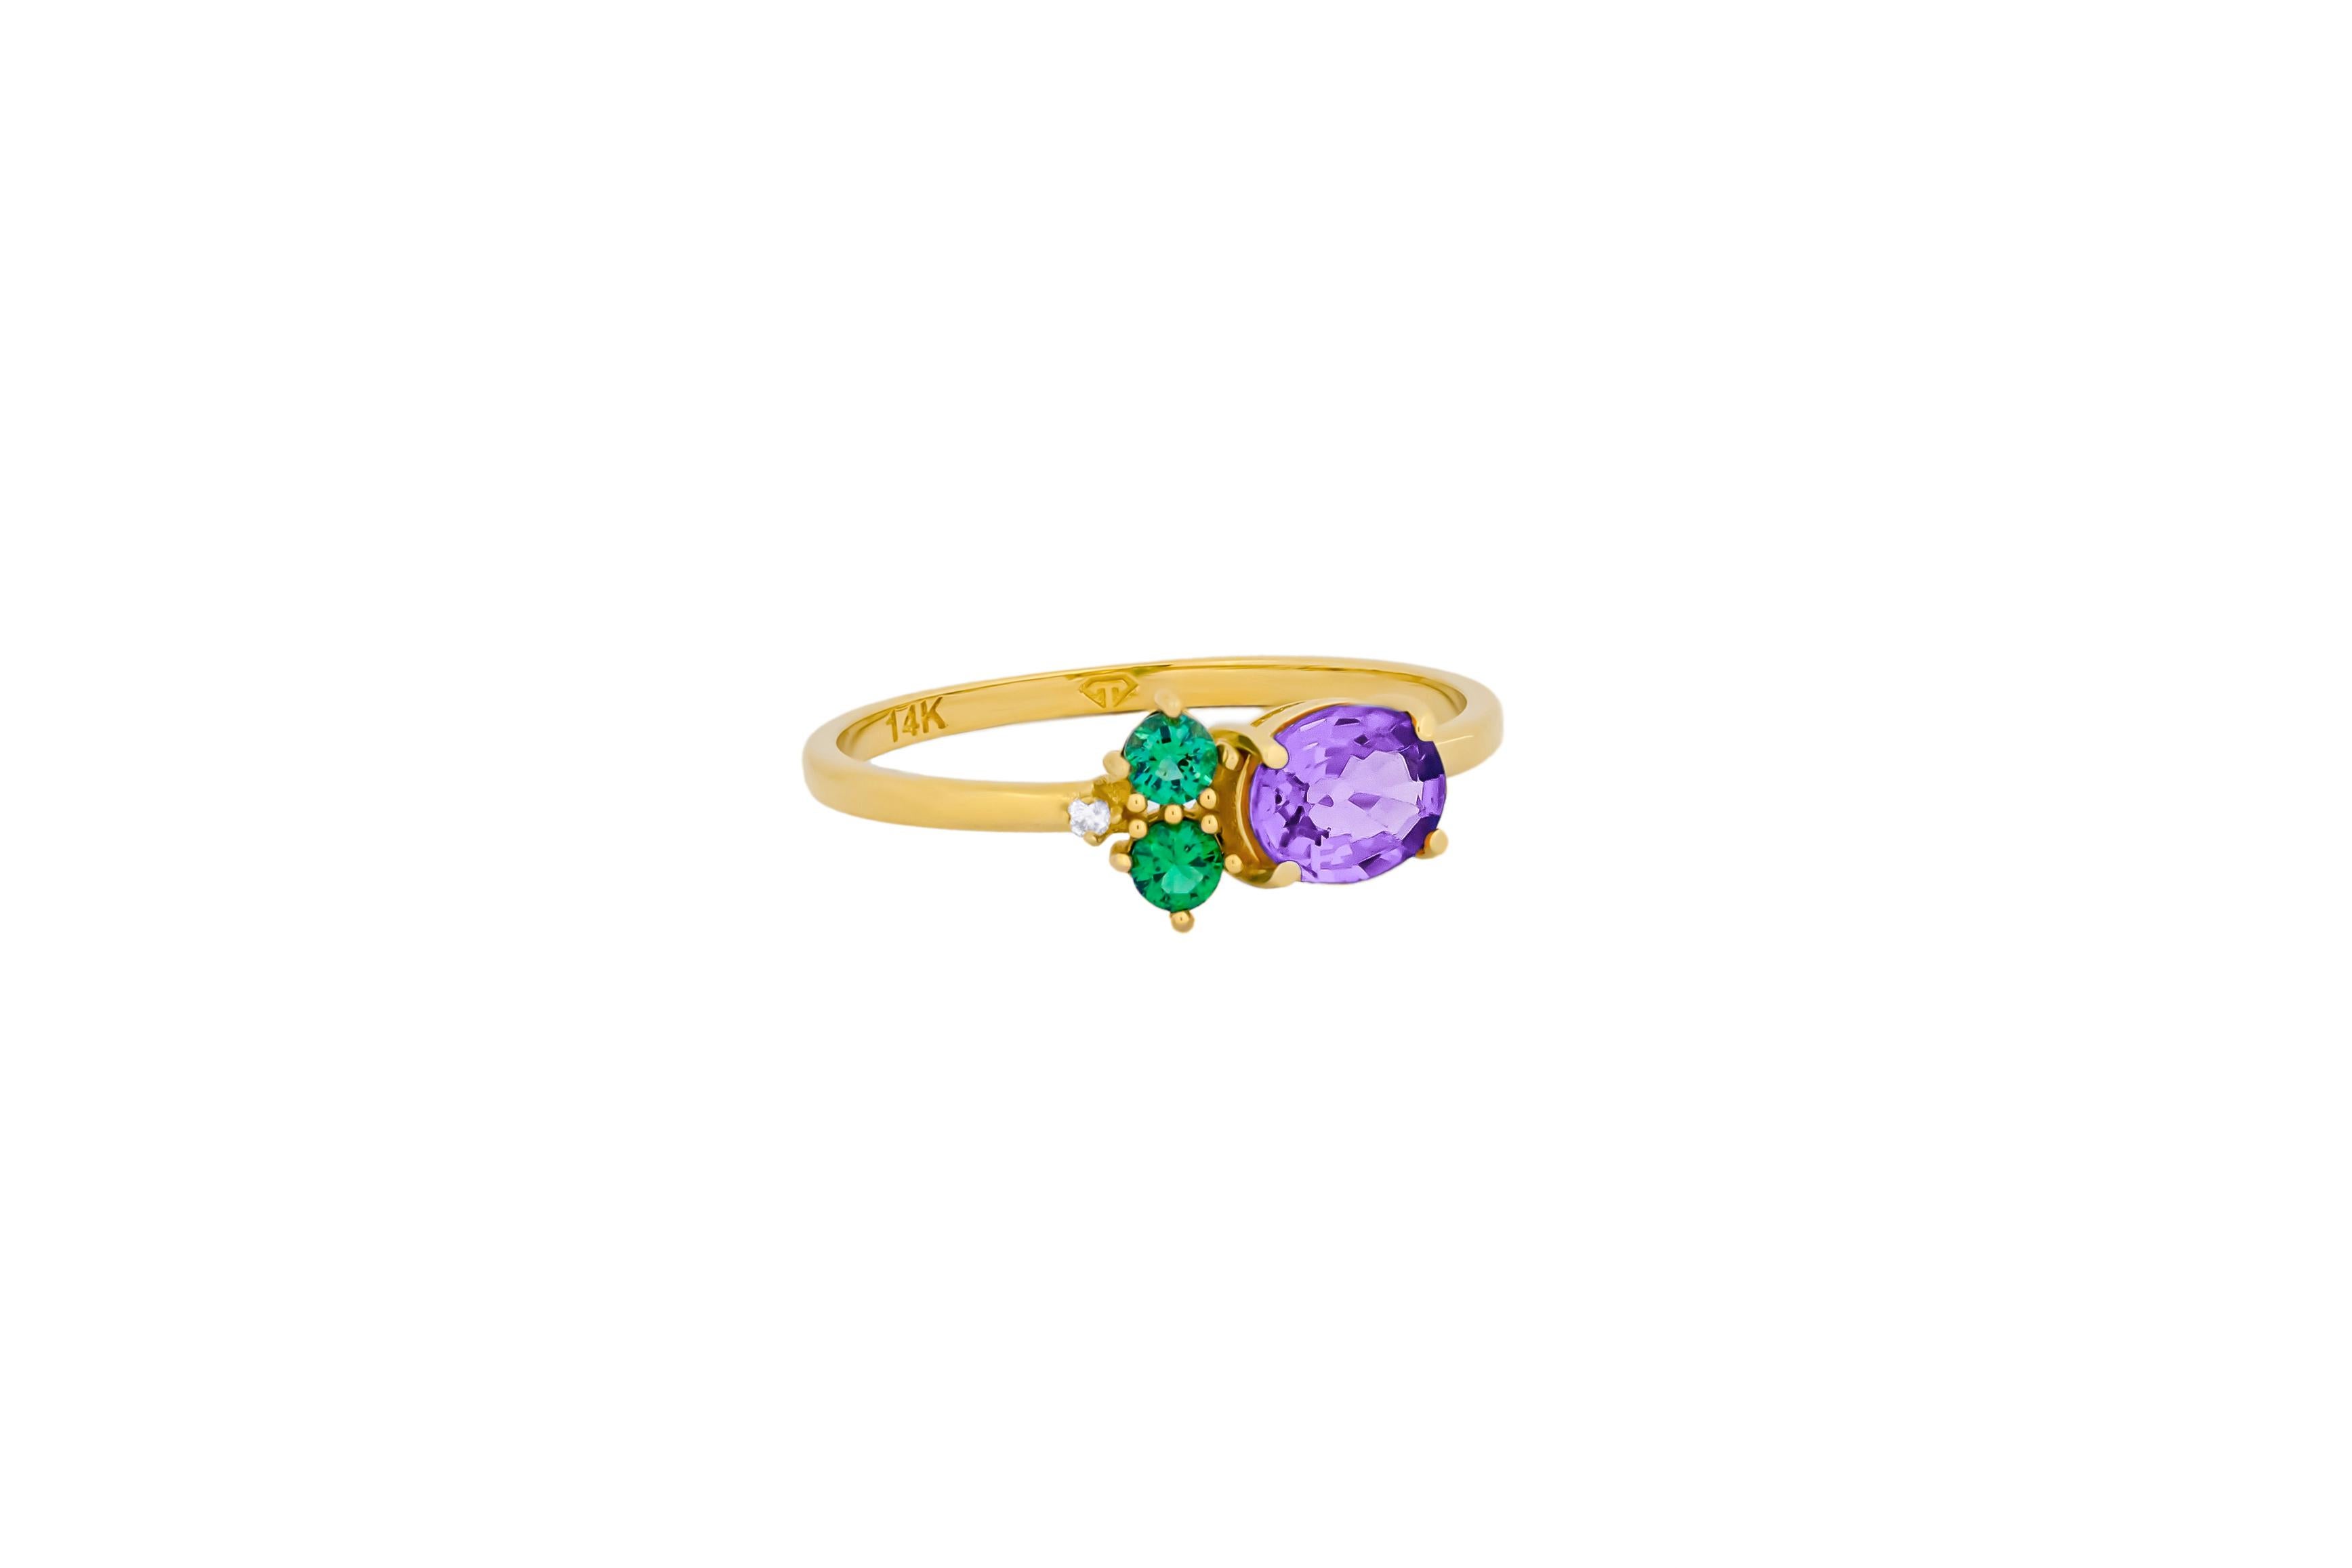 Oval Cut Oval amethyst, tsavorite and diamonds 14k gold ring. For Sale